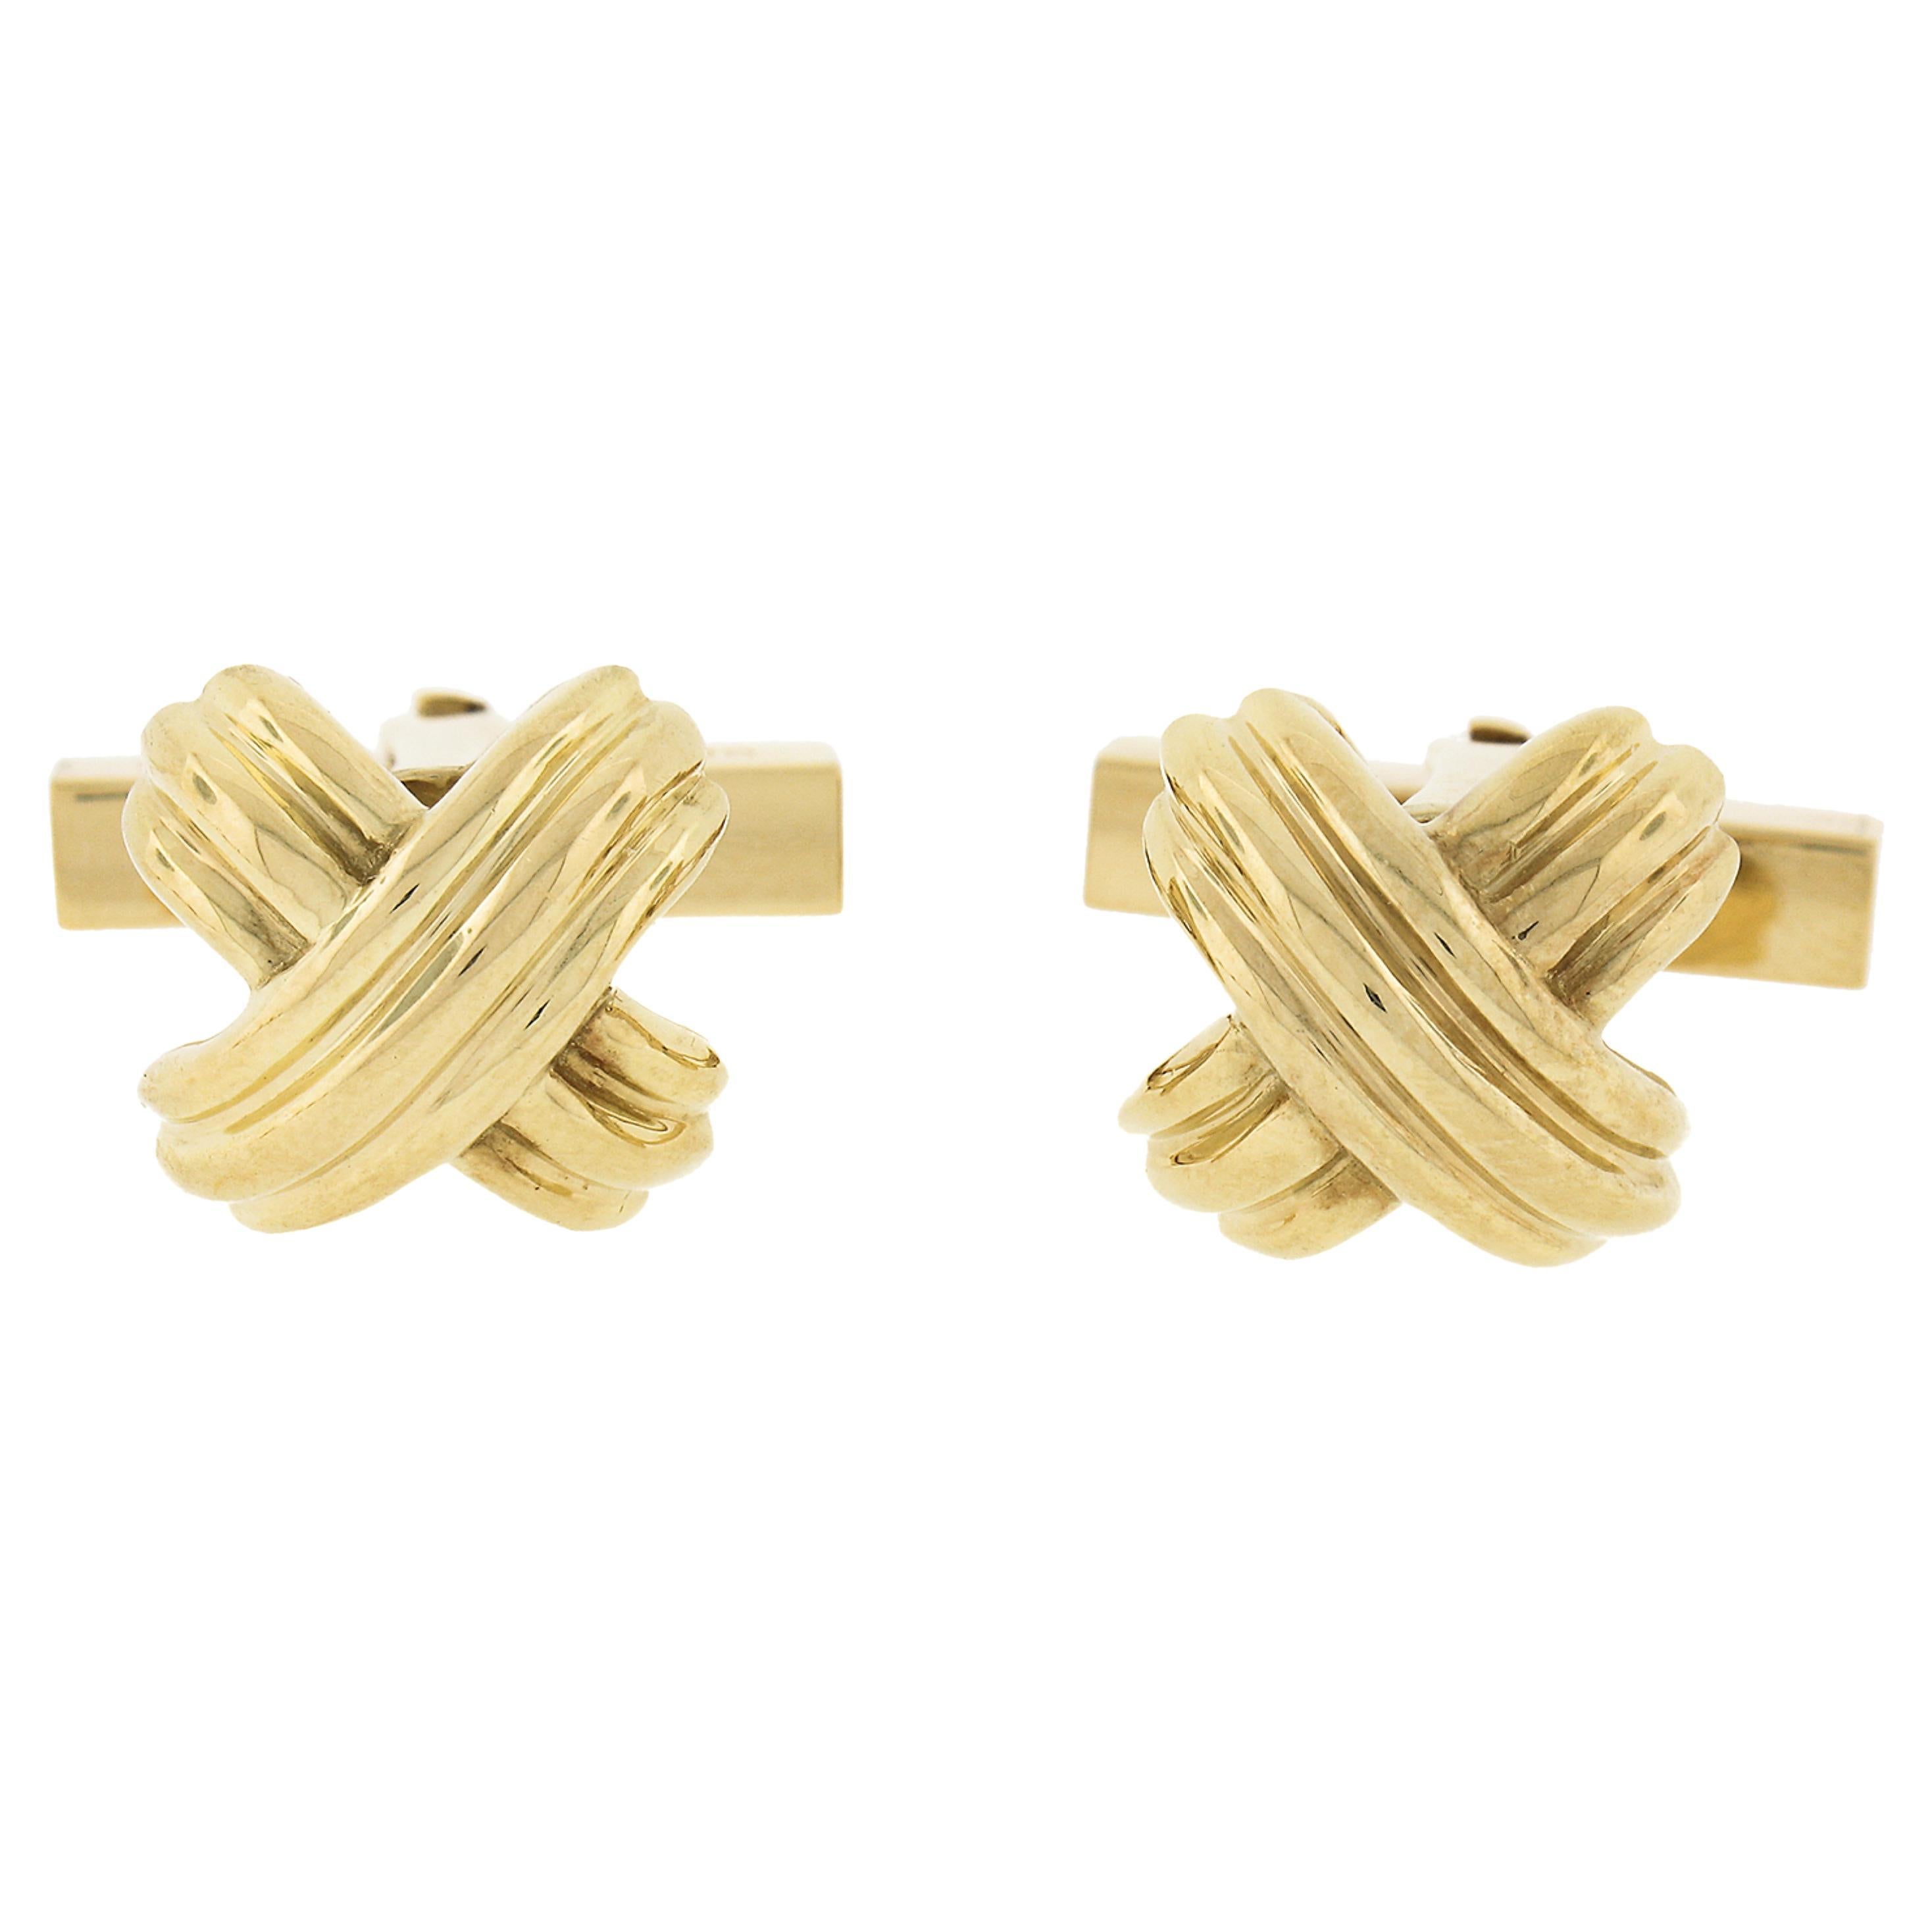 Here we have an authentic Tiffany & Co. classy set of solid 18k yellow gold cuff links and 4 button studs. All of the panels are X signature shaped and feature a grooved sharp-looking with polished finish throughout. The swivel backings of the cuff